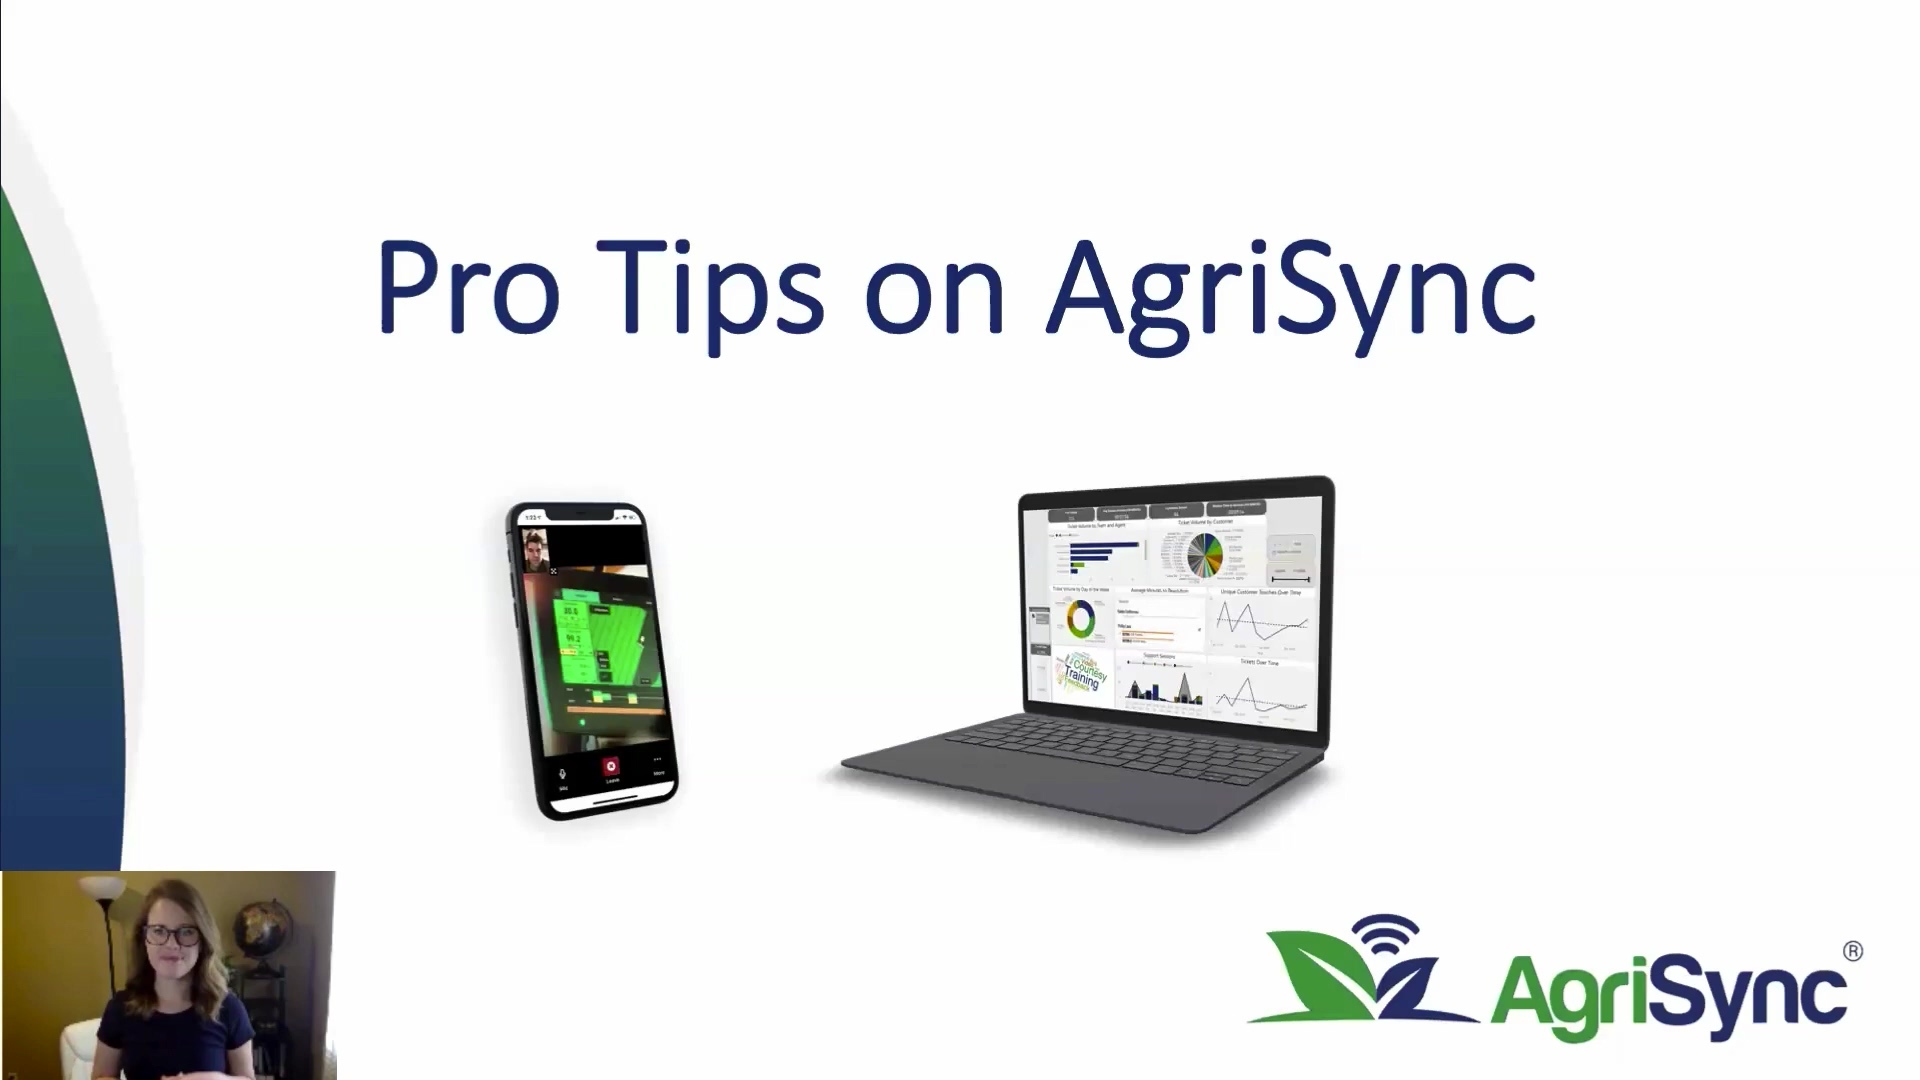 Pro Tips for Using AgriSync